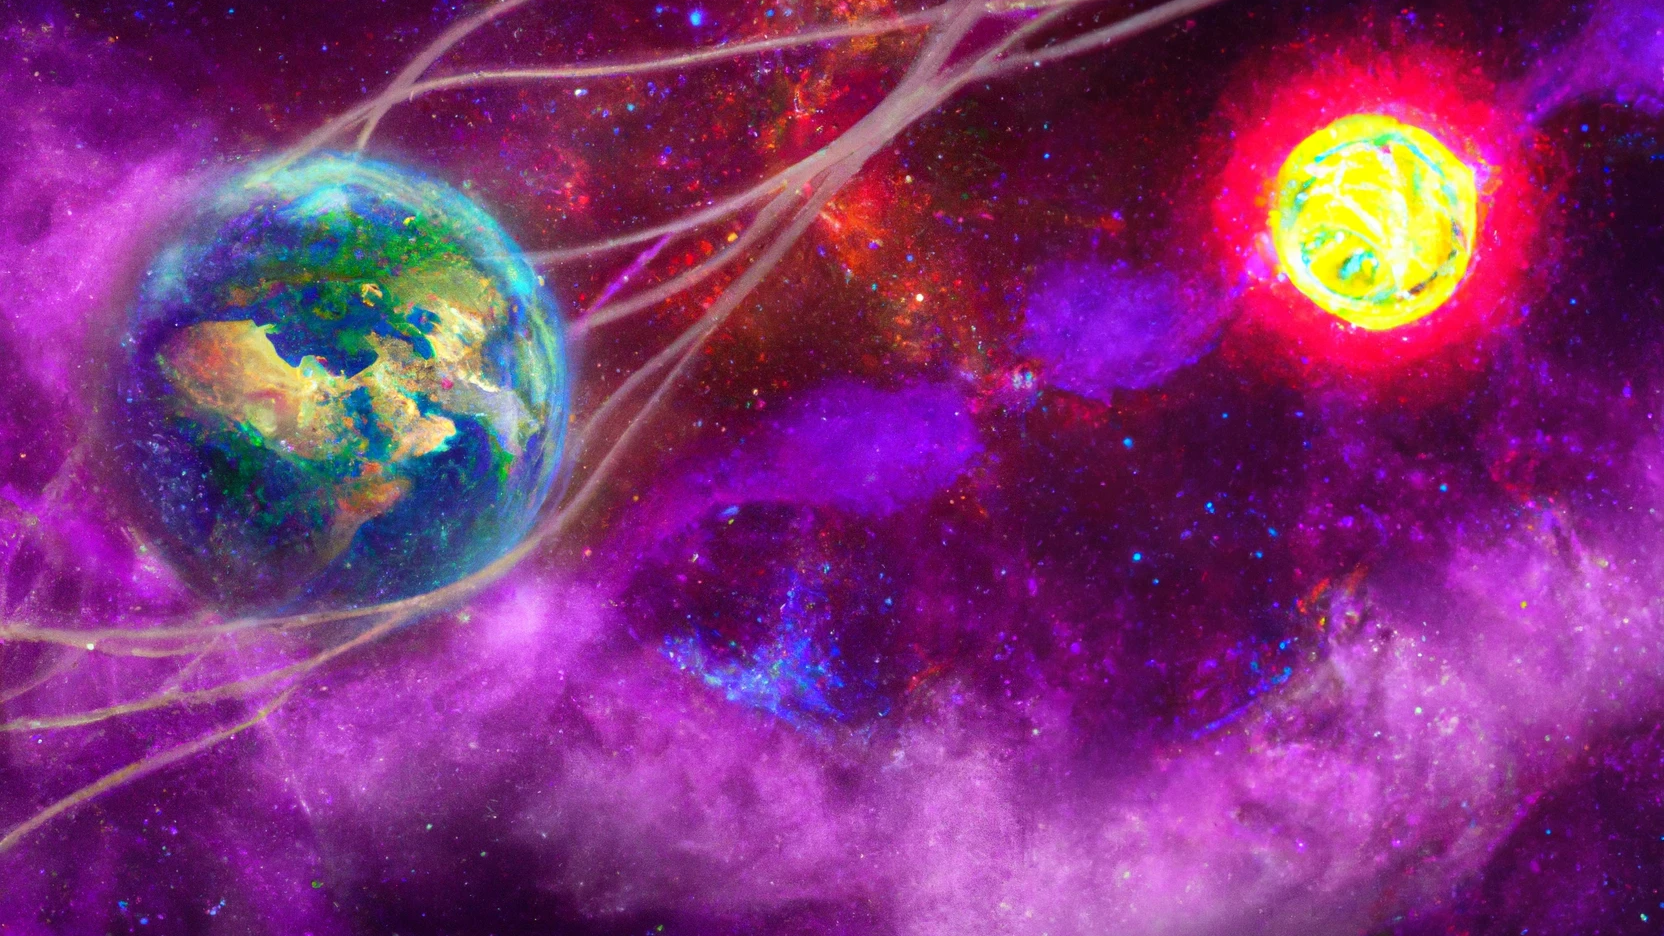 striking digital illustration of the earth and sun tangled in strings in a colorful nebula - Generated by Dall-E 2